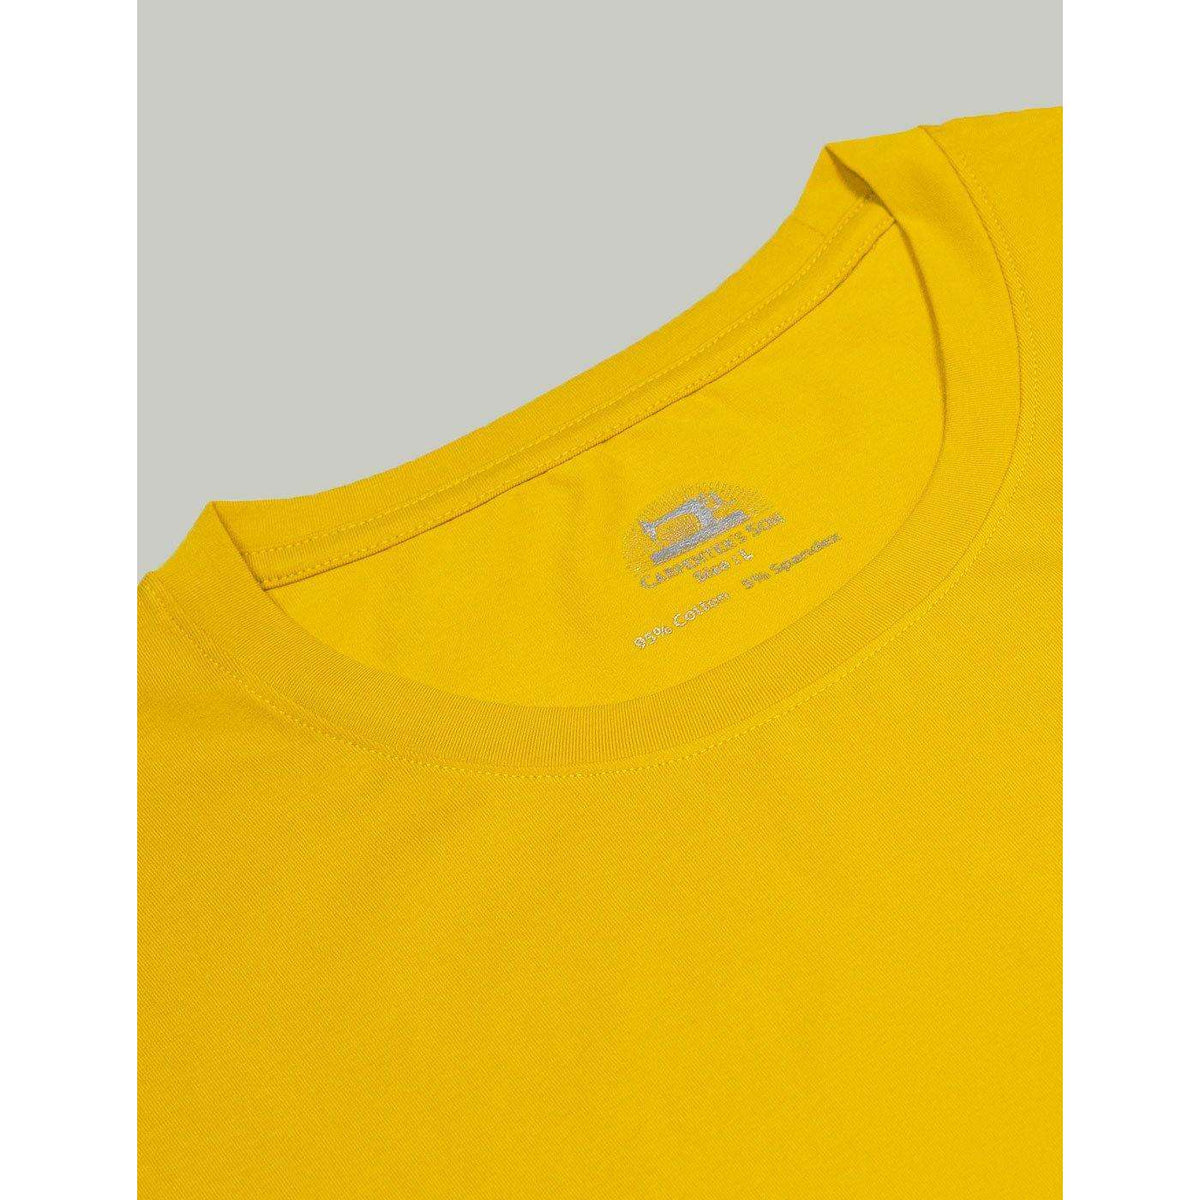 [First Edition] Short Sleeve Classic Crew Neck Tee - Carpenterssonco